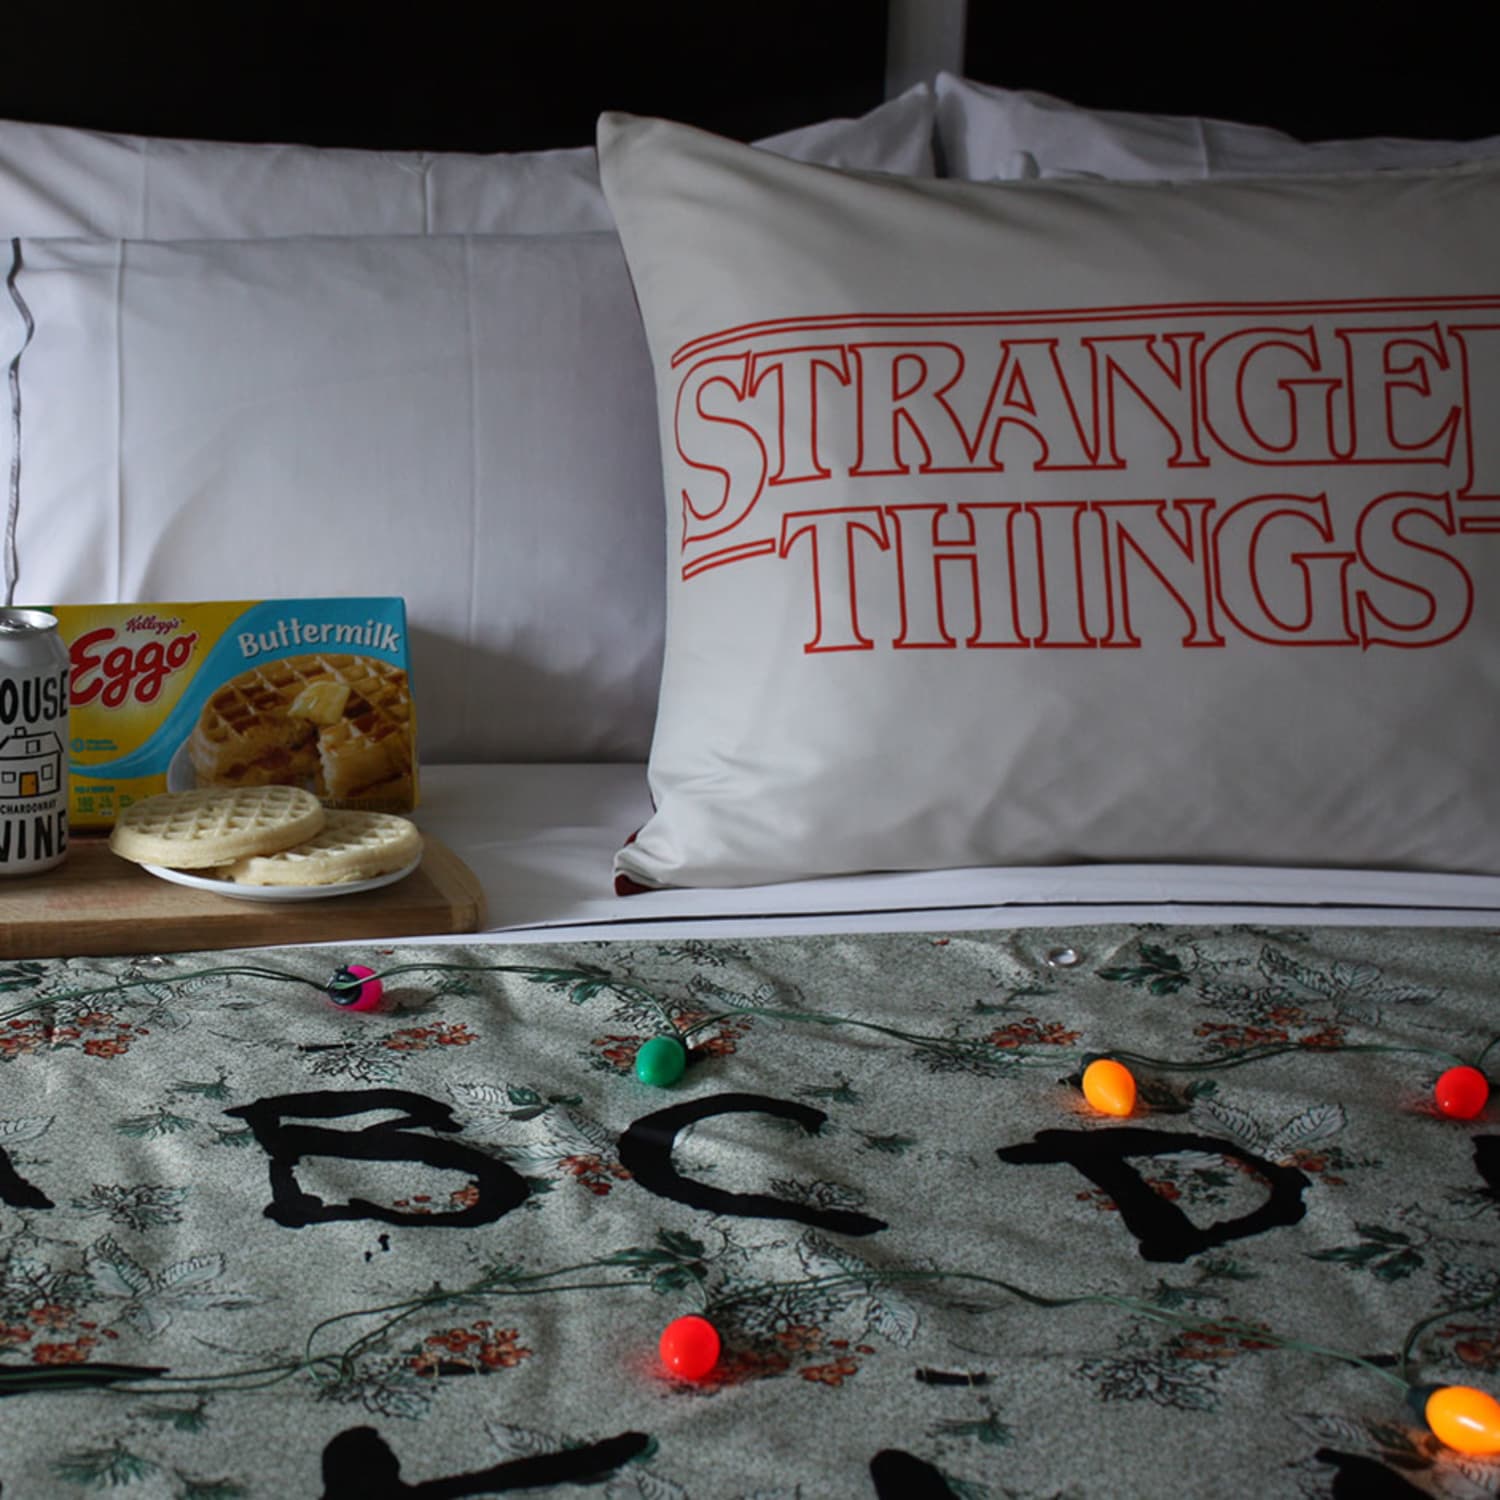 NYC hotel offers 'Stranger Things' binge-watching experience